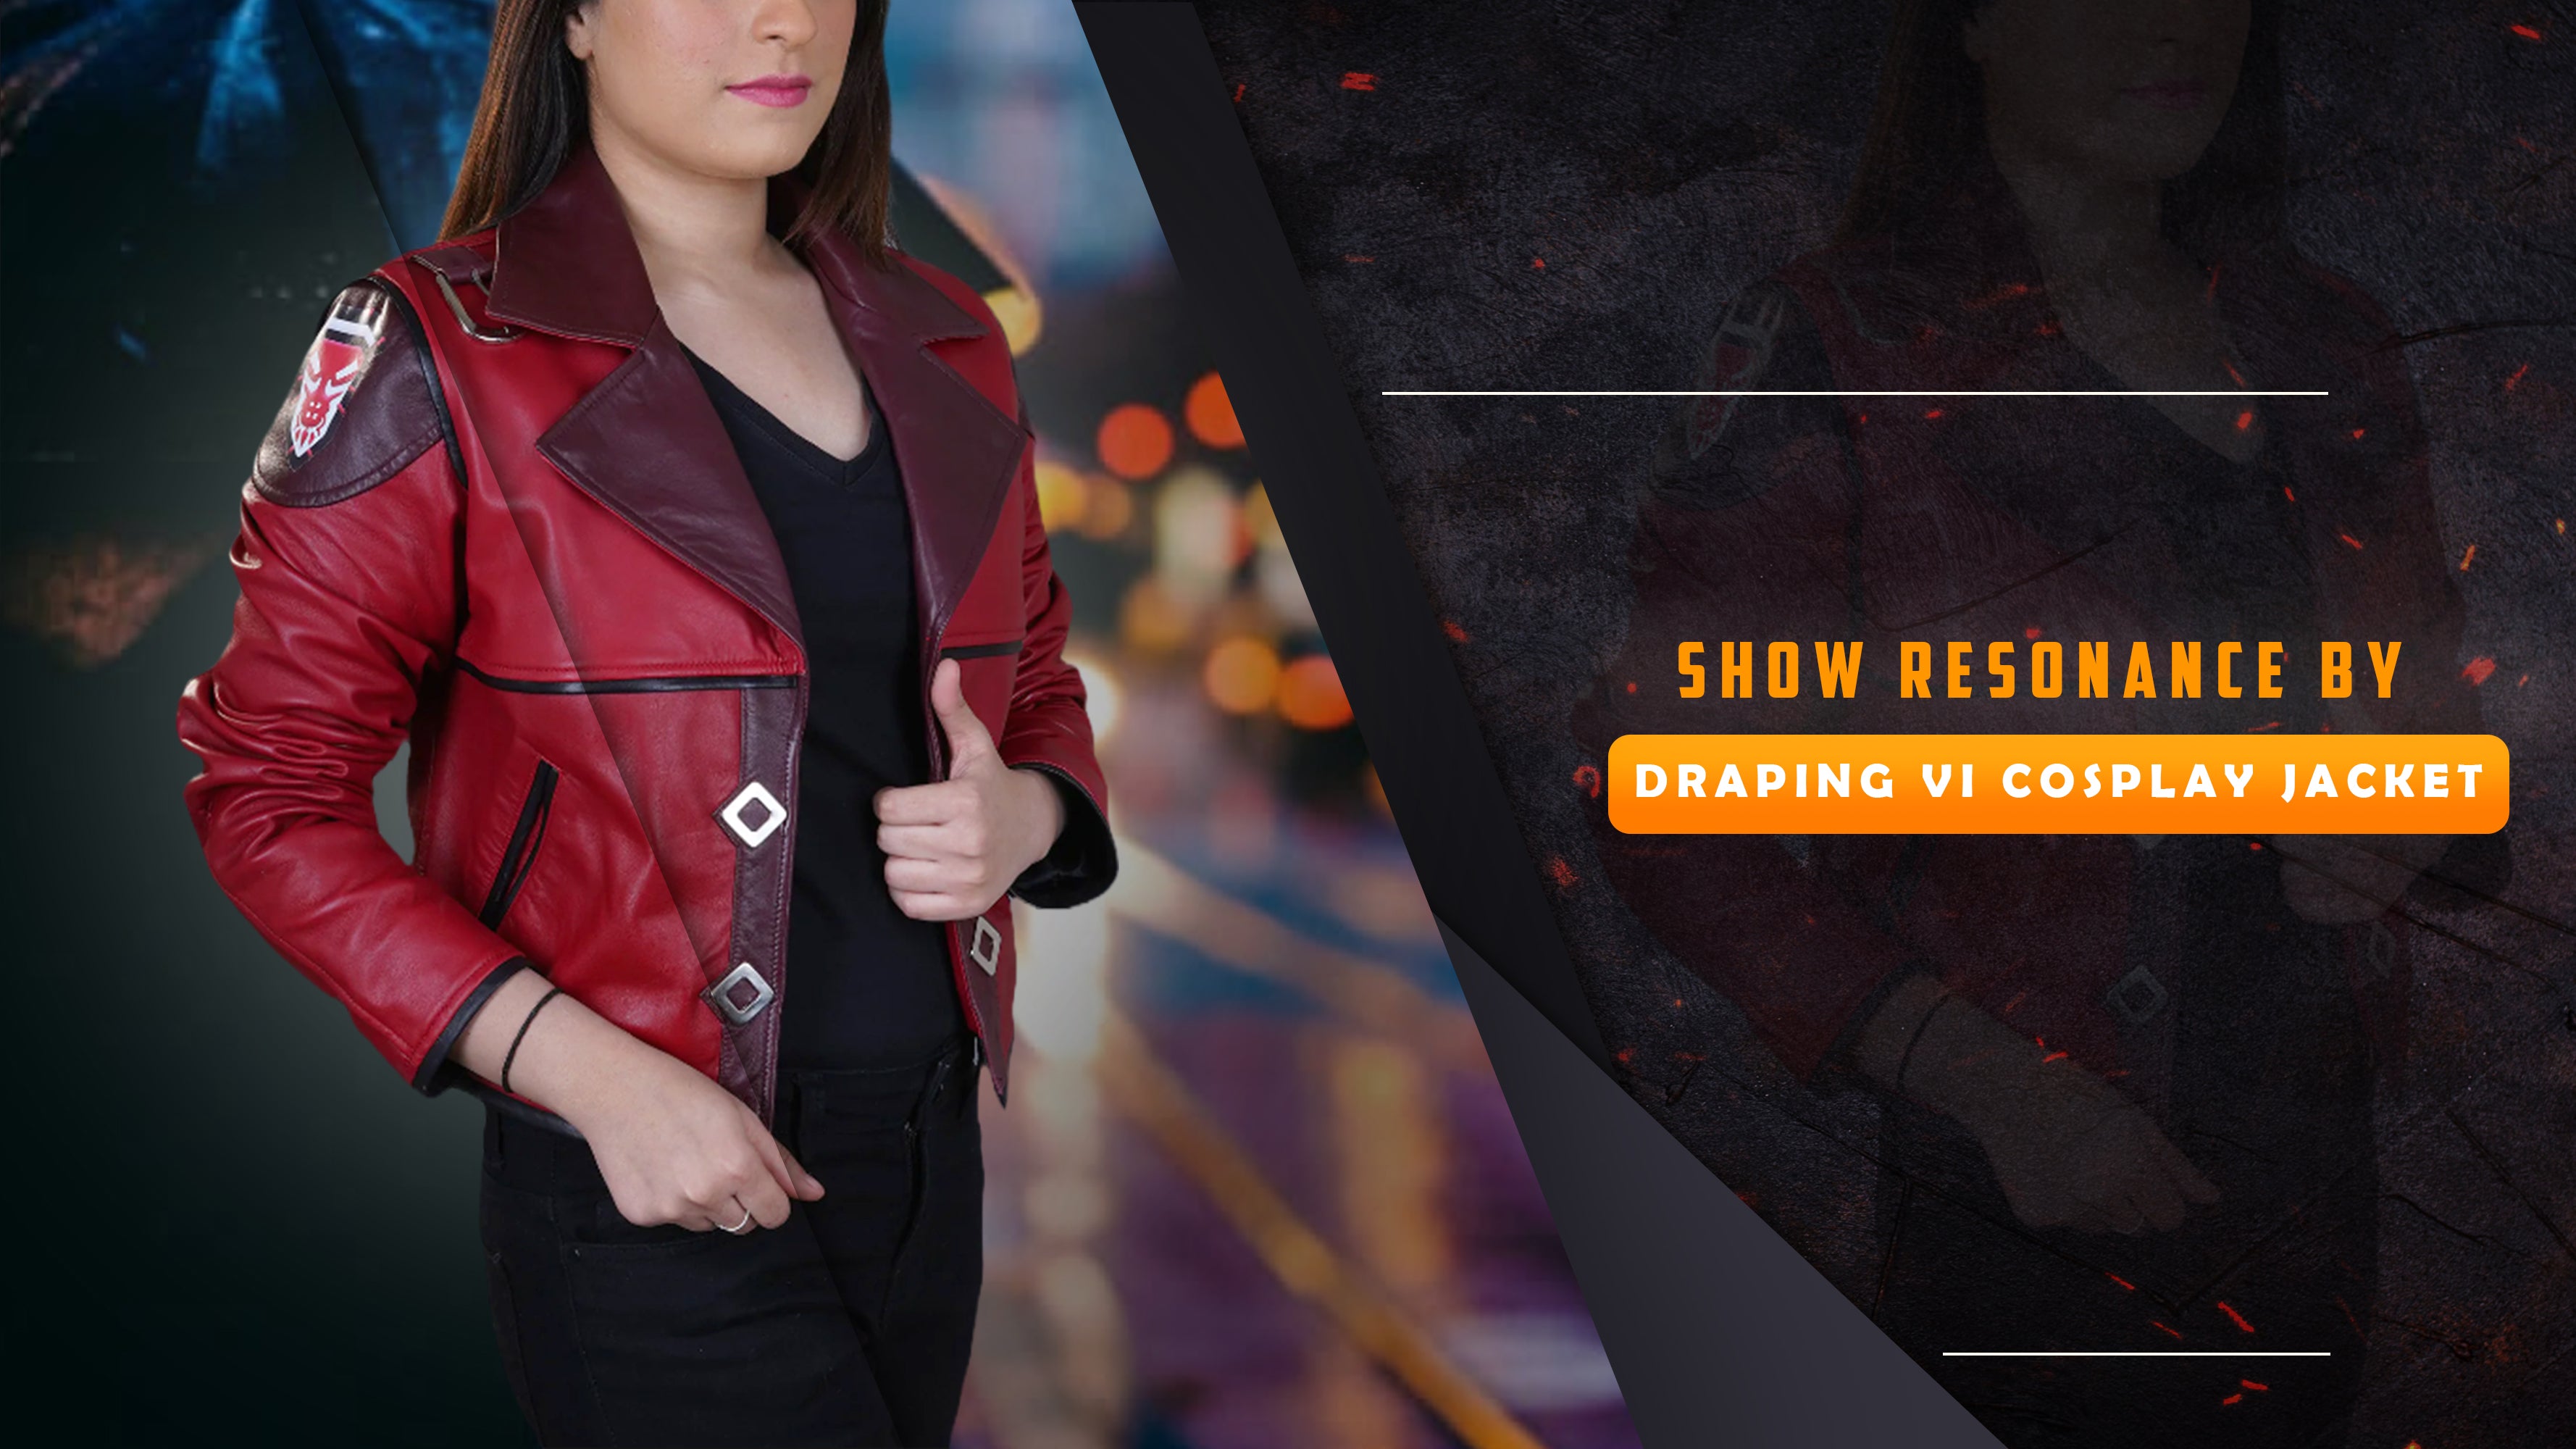 Show Resonance by Draping Vi Cosplay Jacket